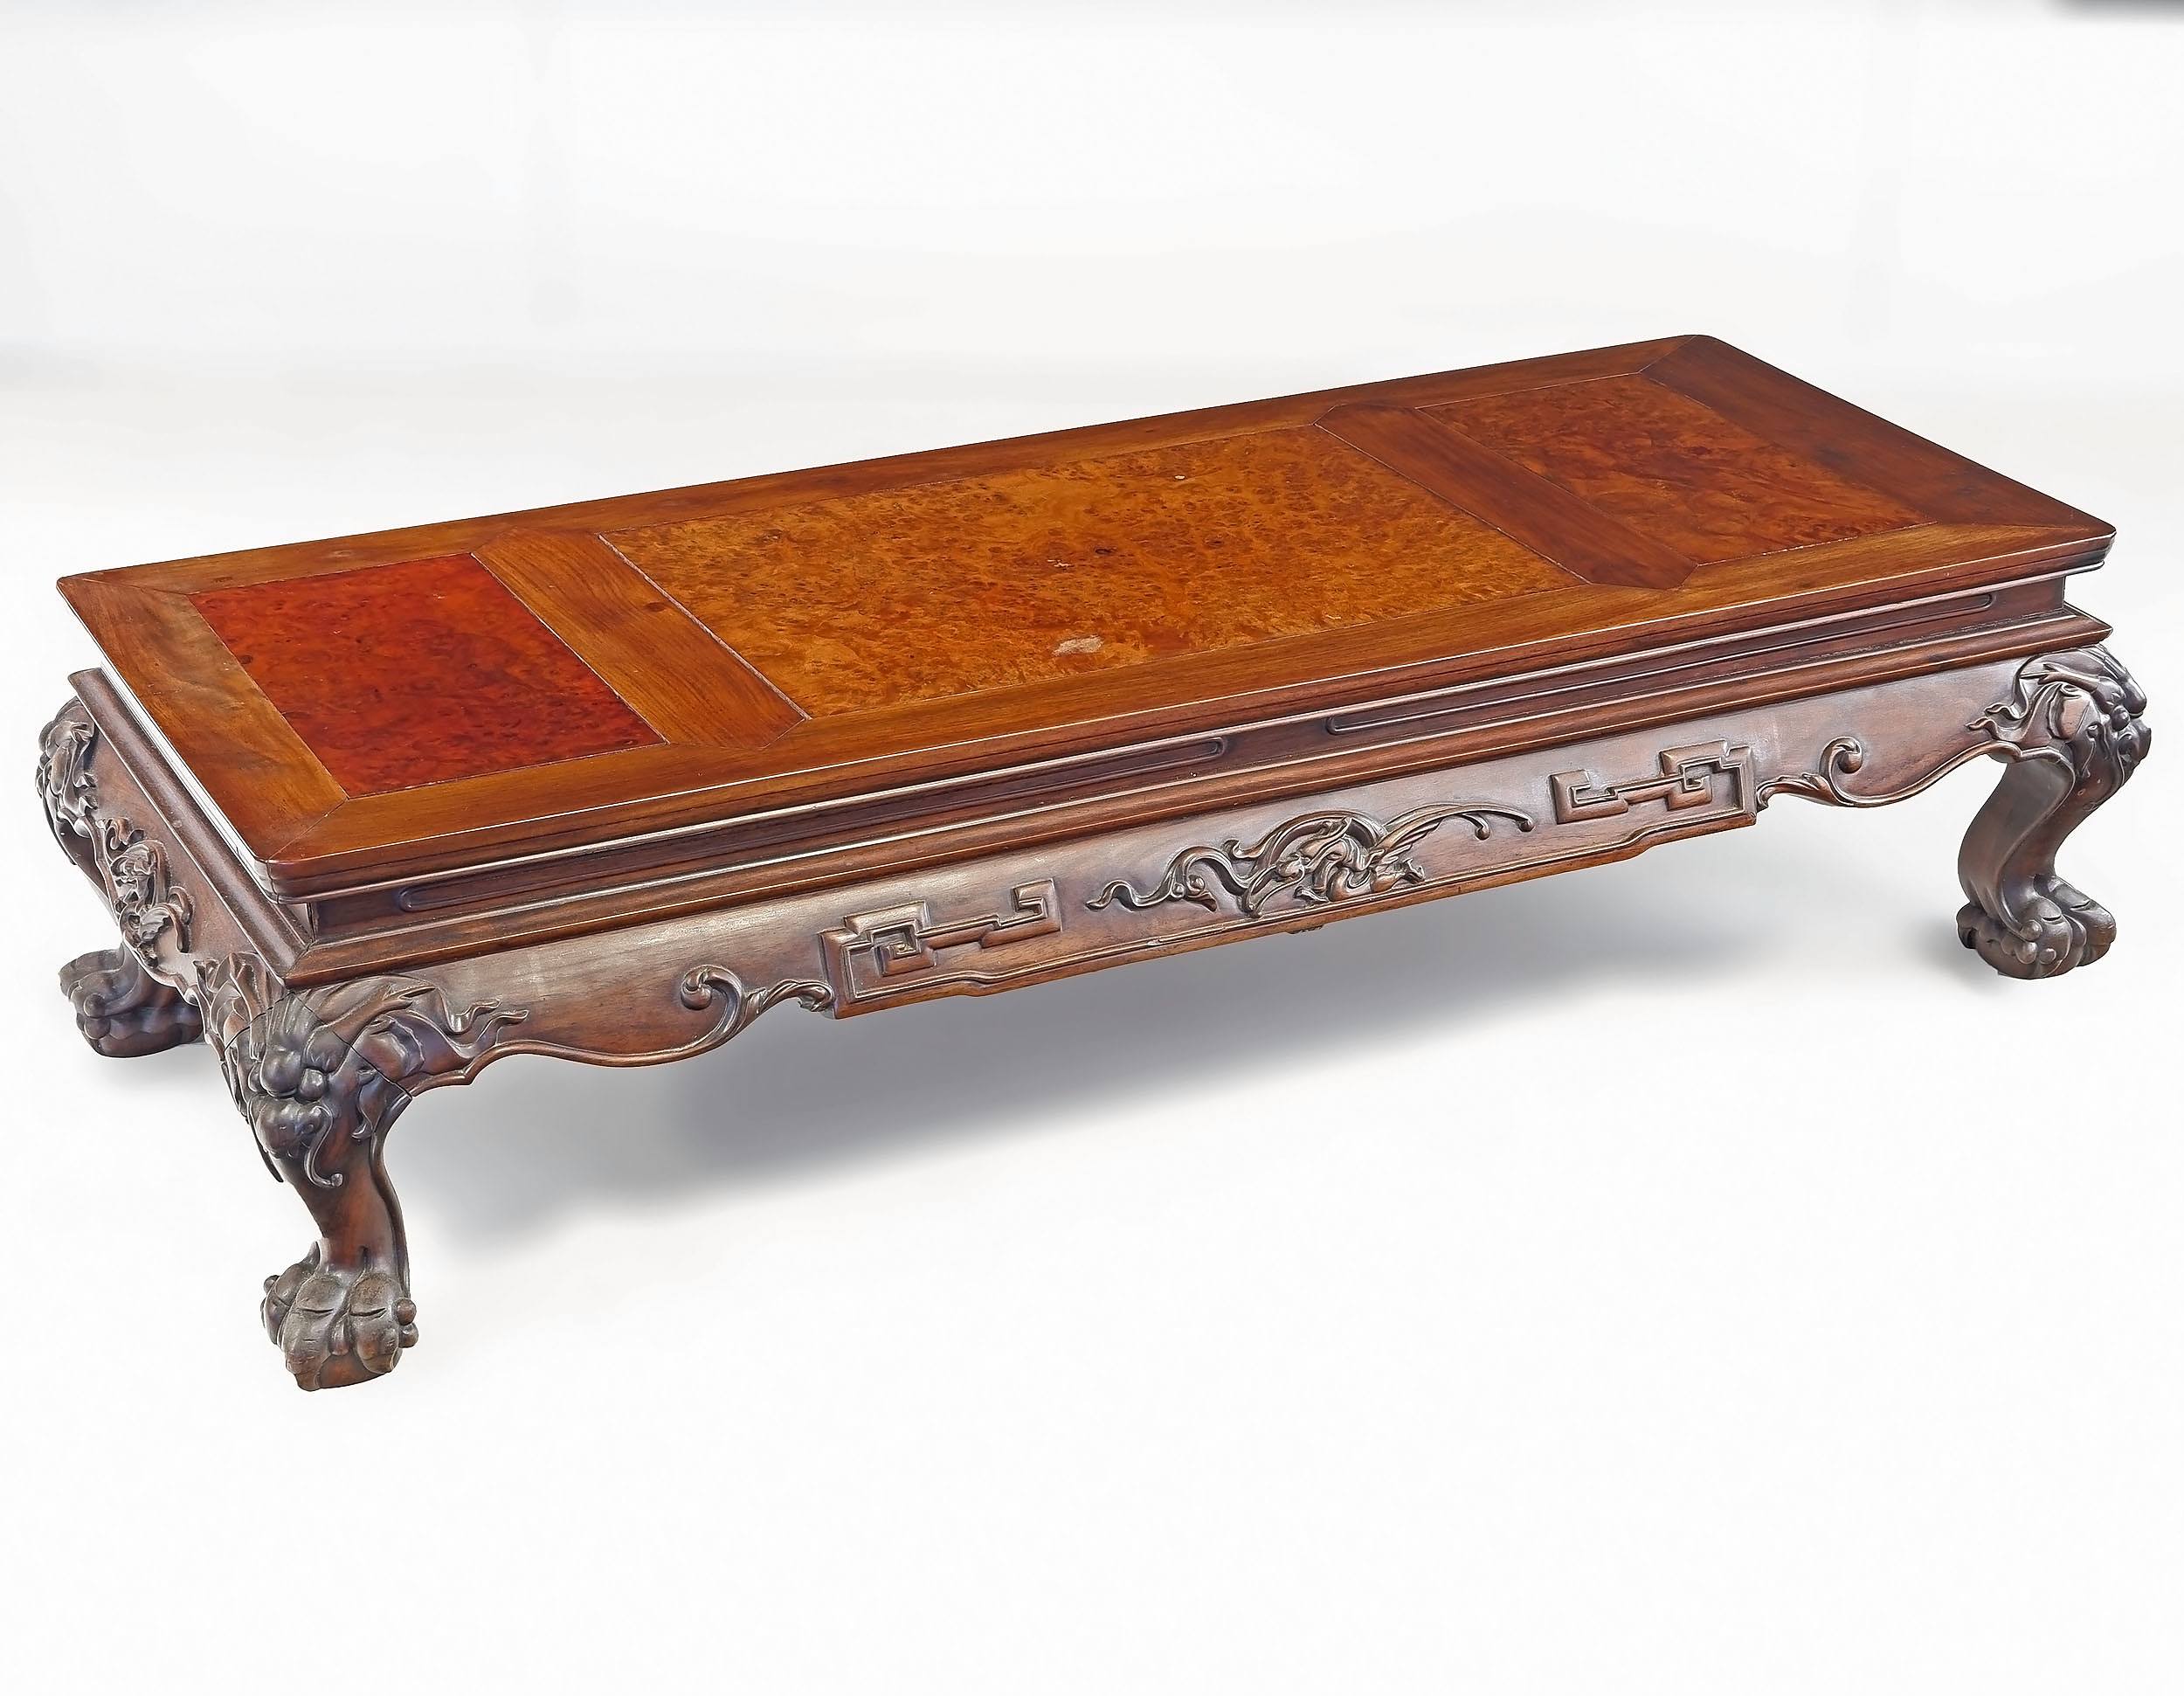 'Good Chinese Hongmu Rosewood and Burlwood Kang Table, Early to Mid 20th Century'